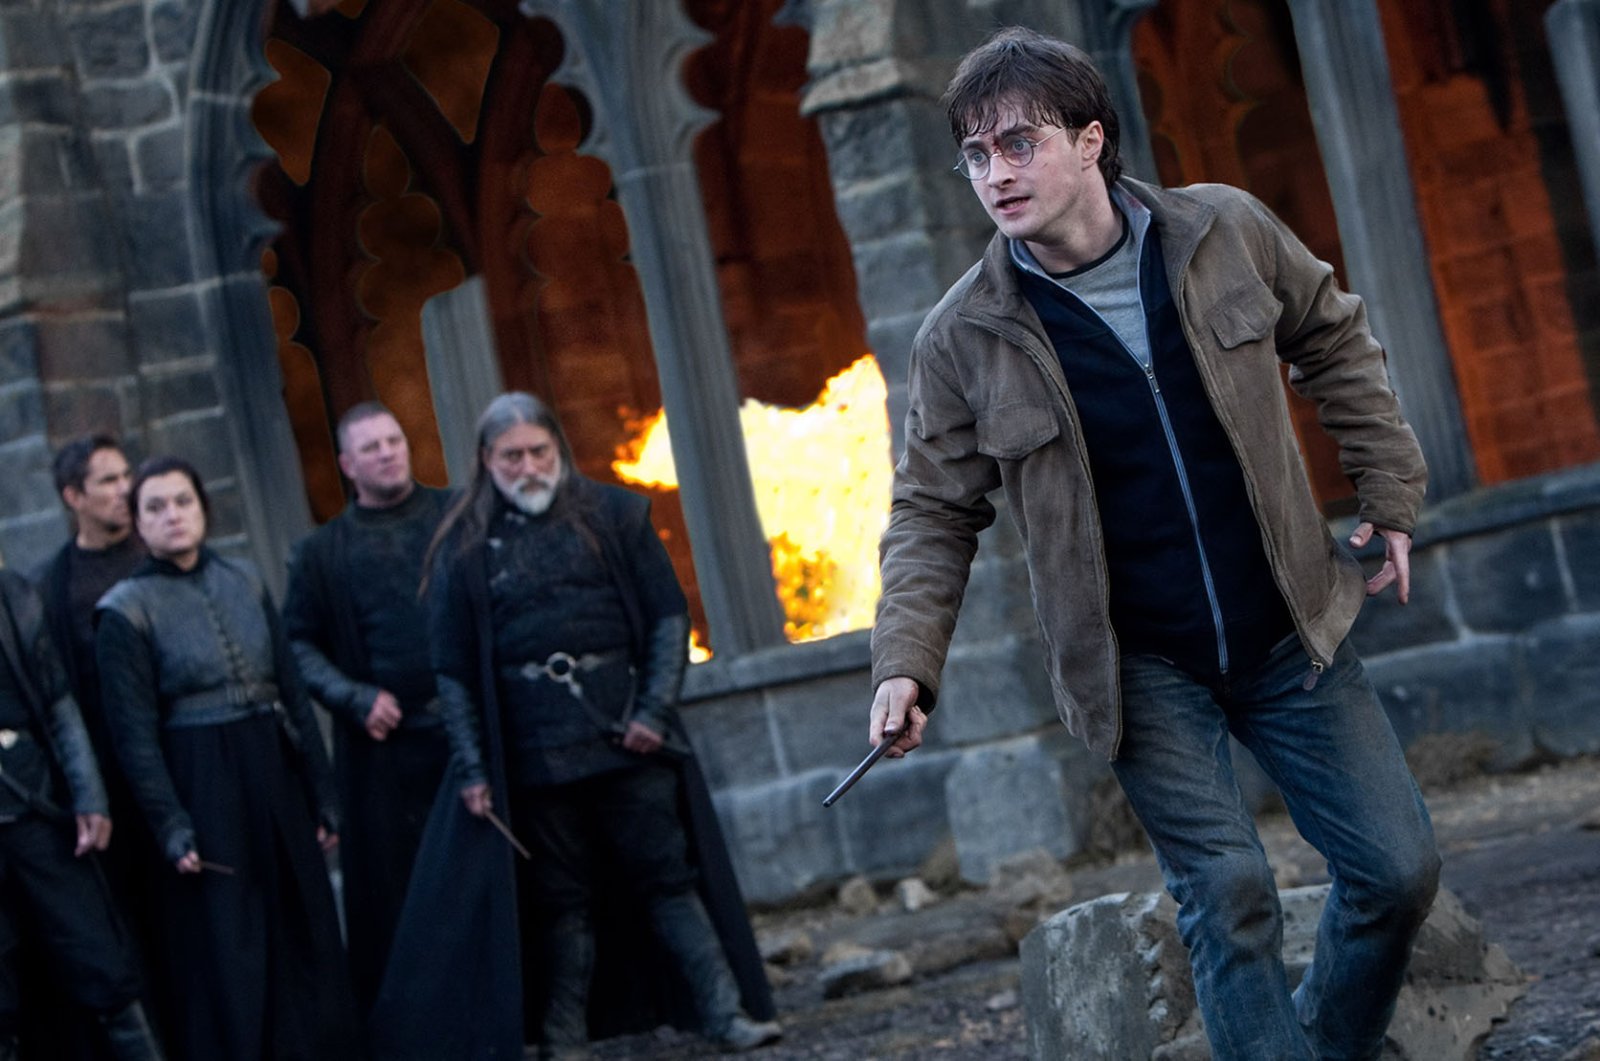 Daniel Radcliffe Harry Potter and the Deathly Hallows - Part 2